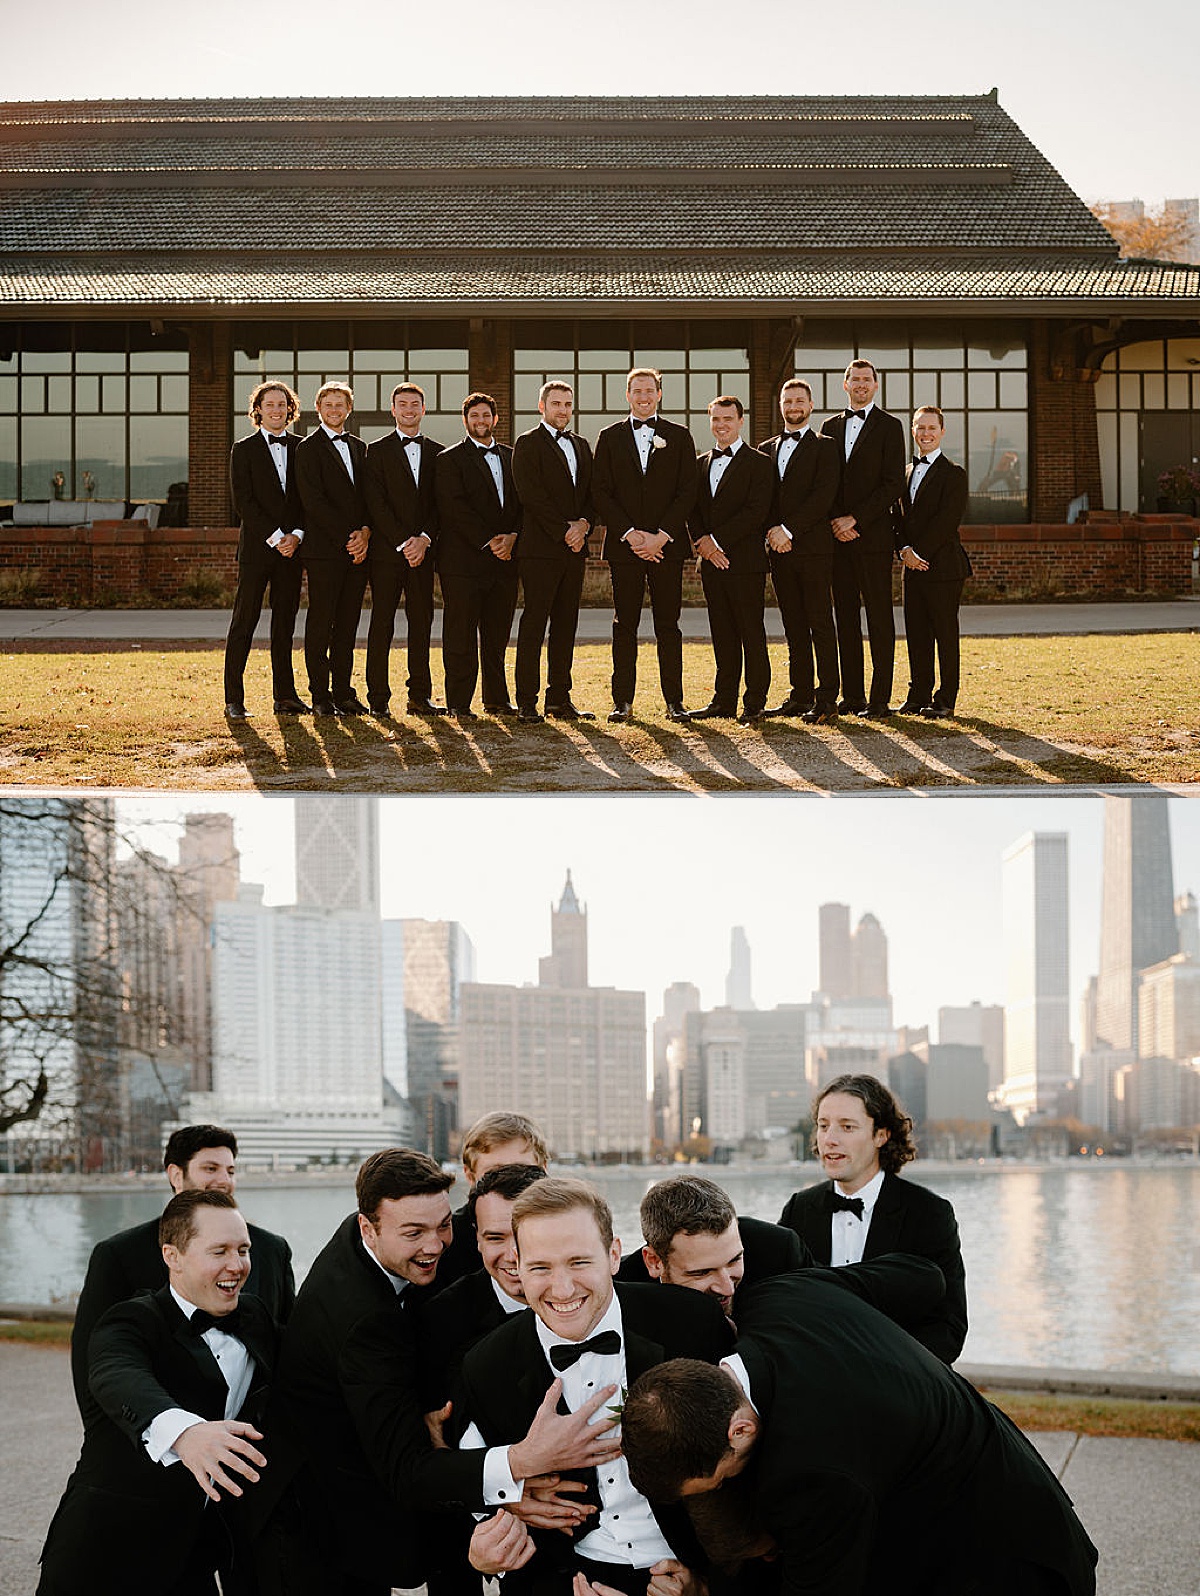 groomsmen pose for portraits and celebrate groom's wedding before elegant ceremony at the clark